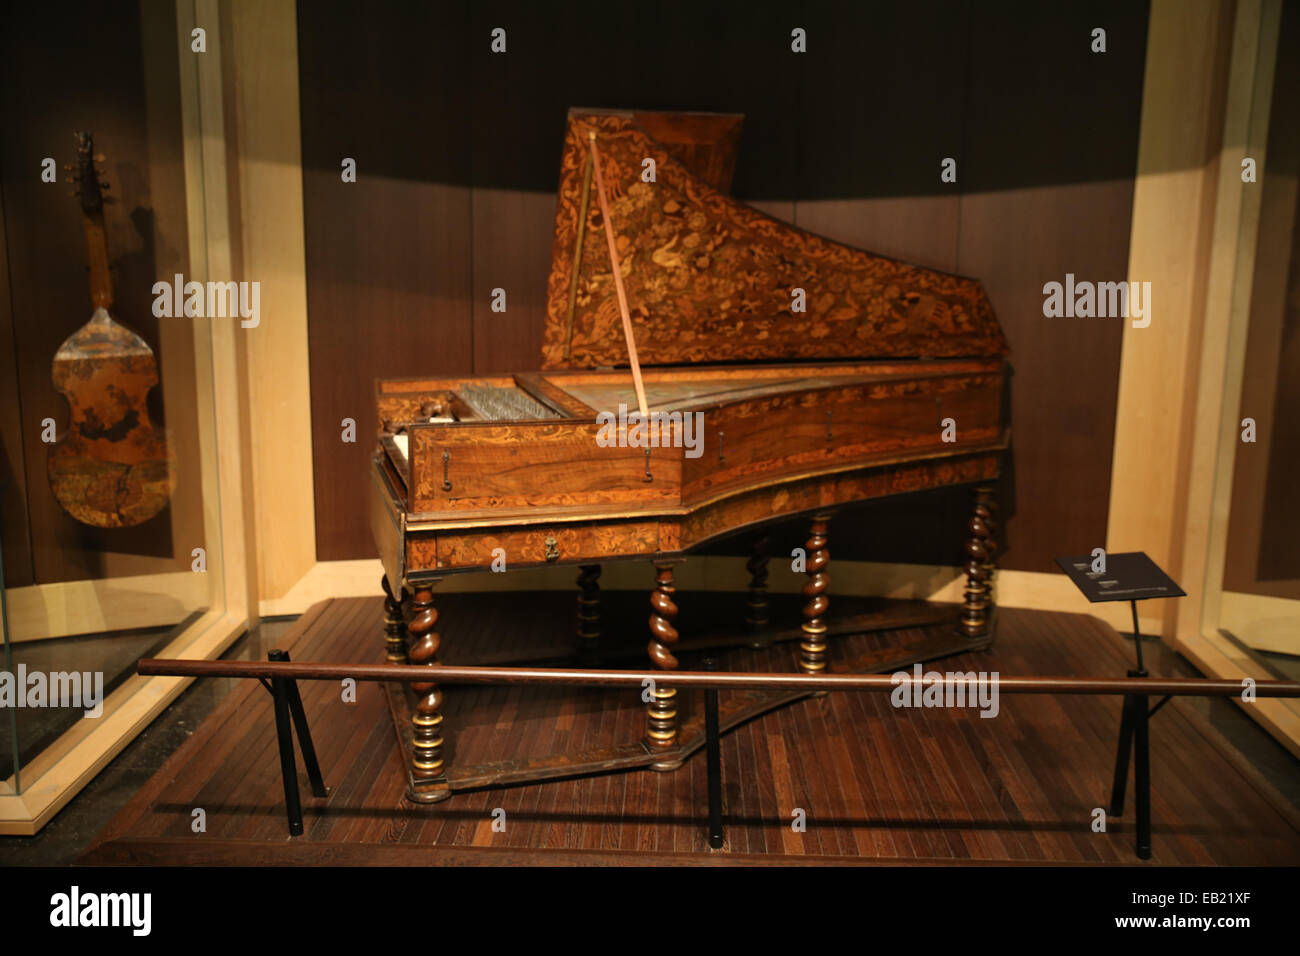 vintage wooden piano display museum Stock Photo